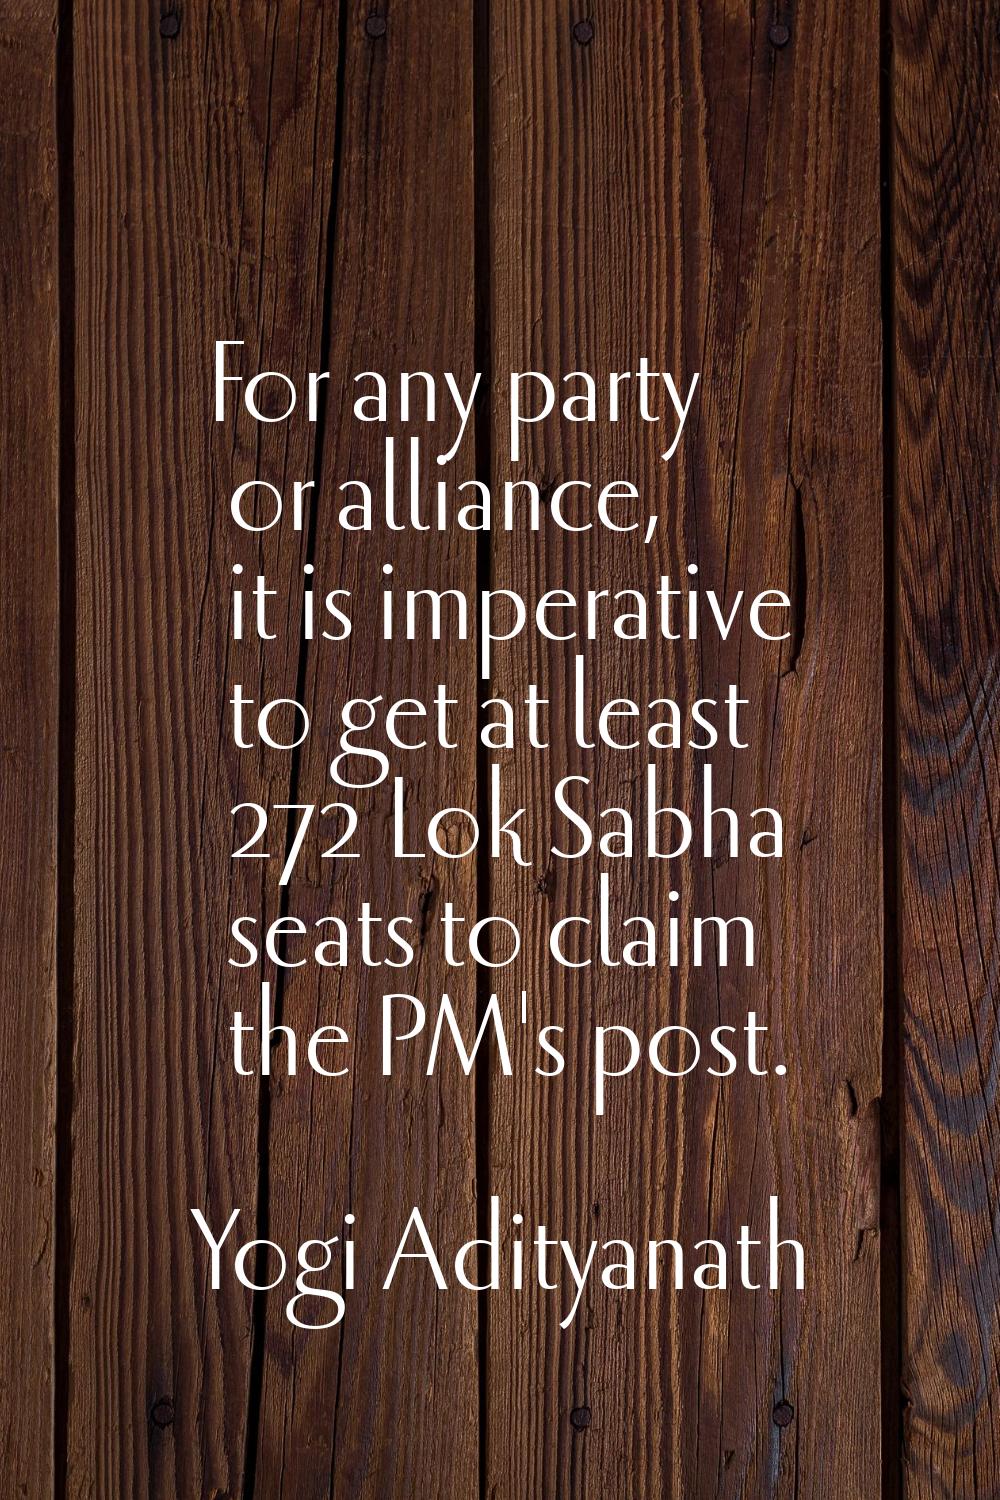 For any party or alliance, it is imperative to get at least 272 Lok Sabha seats to claim the PM's p